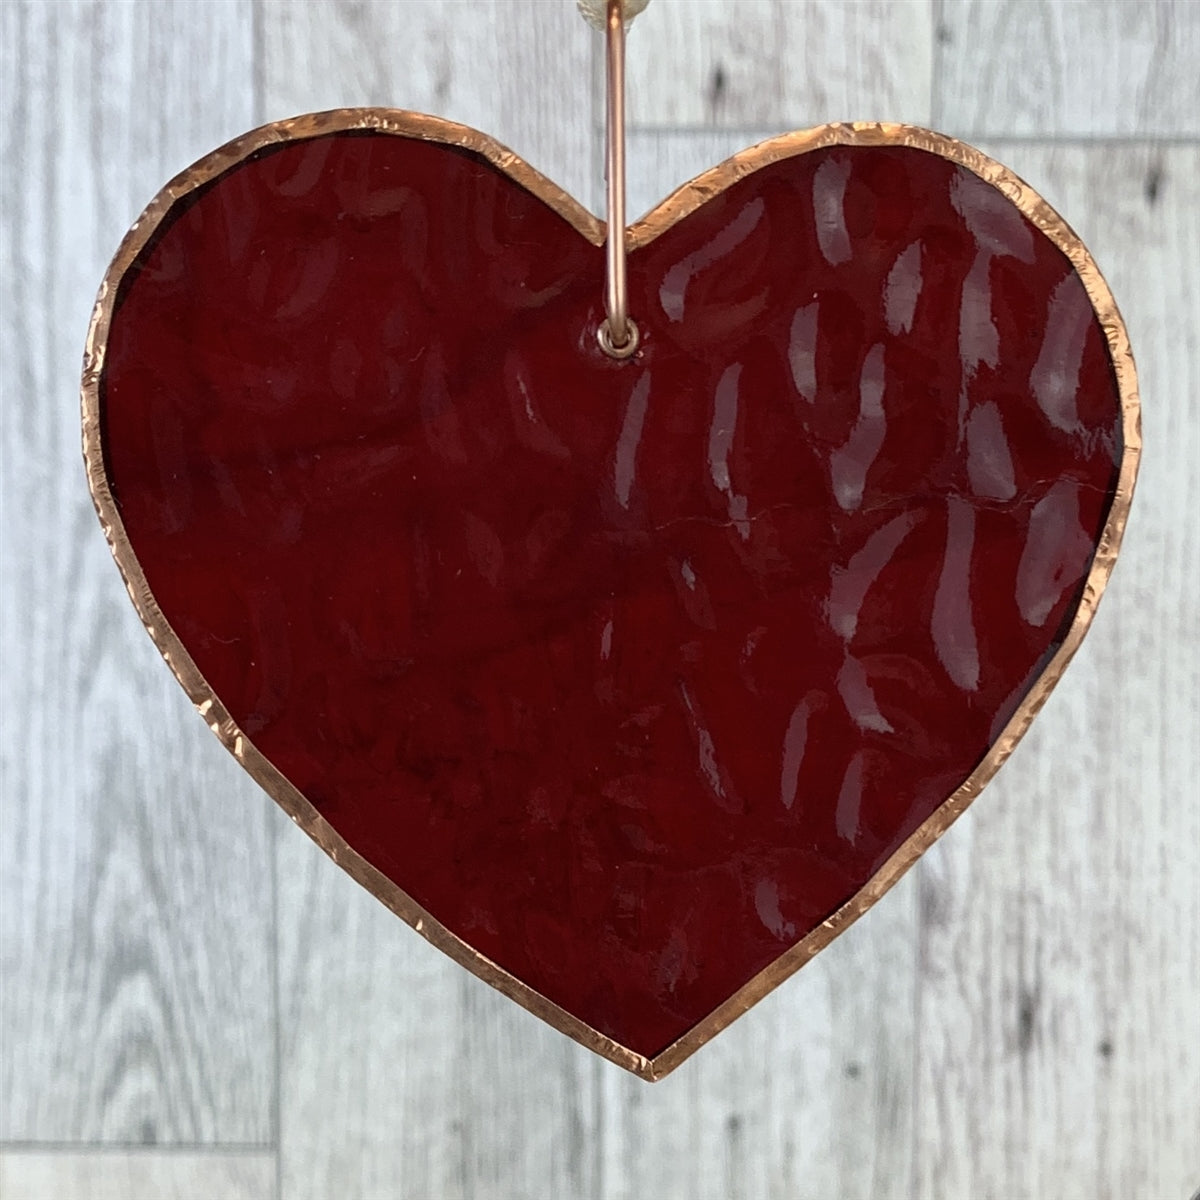 When A Cardinal Sings Memorial Gift: Stained Red Glass Heart